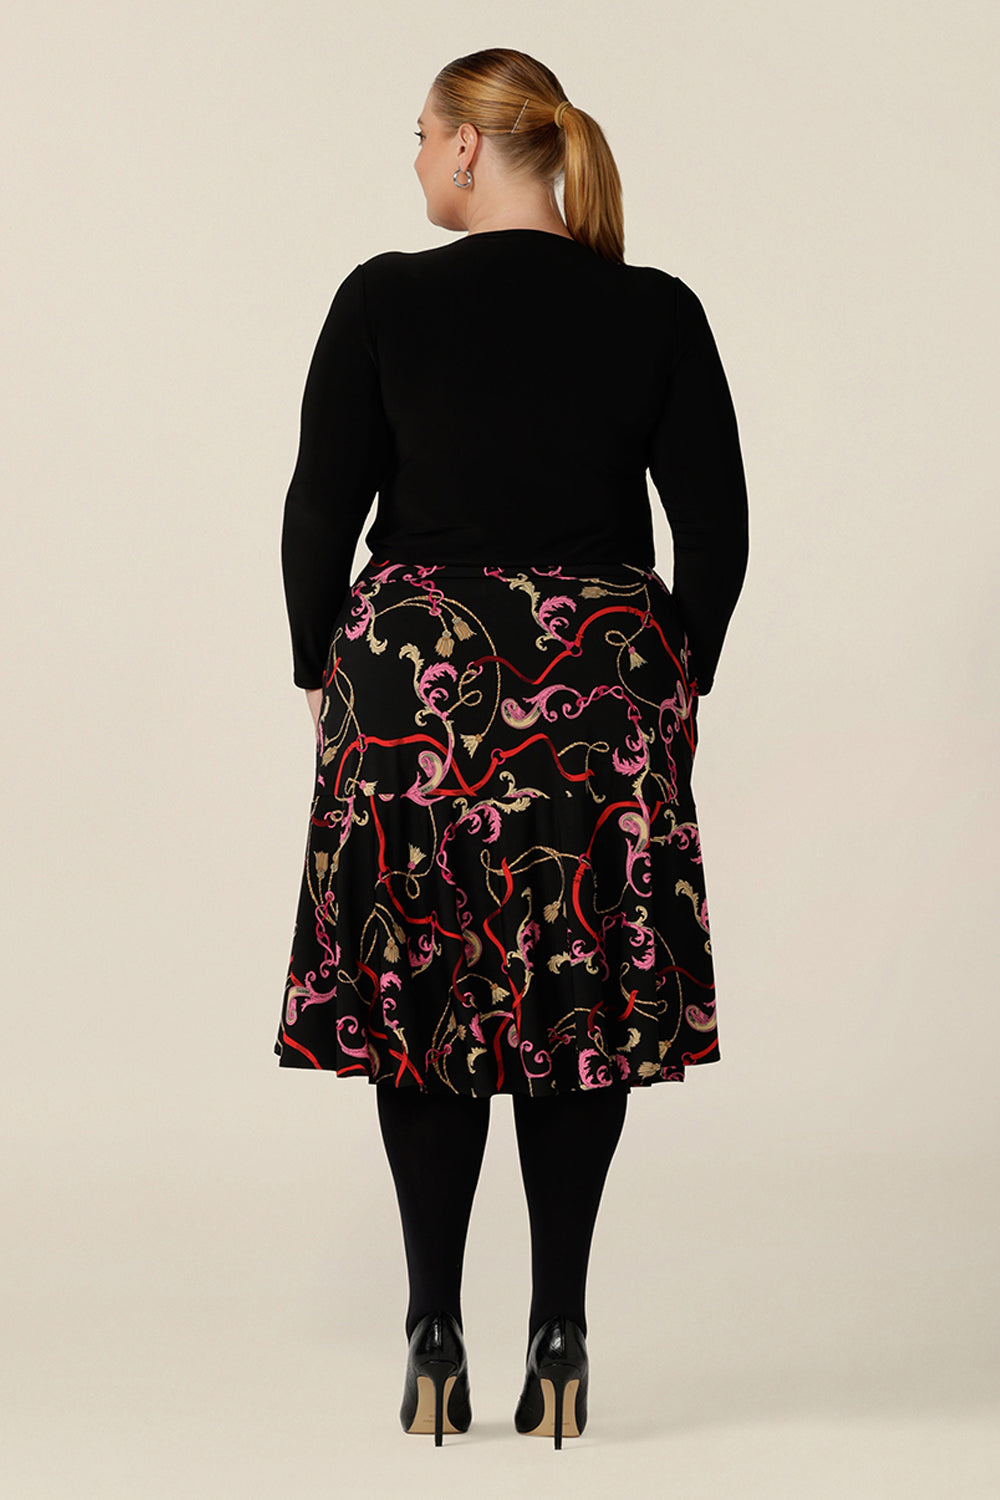 Back view of a curvy, size 18 woman wearing a good skirt for plus size workwear. The Berit Skirt in Tassel is a pull-on knee length skirt with pockets and ruffle hem, and is worn with a square neck, long sleeve black top. Both women's plus size skirt and top are made in Australia by Australian fashion brand, L&F.